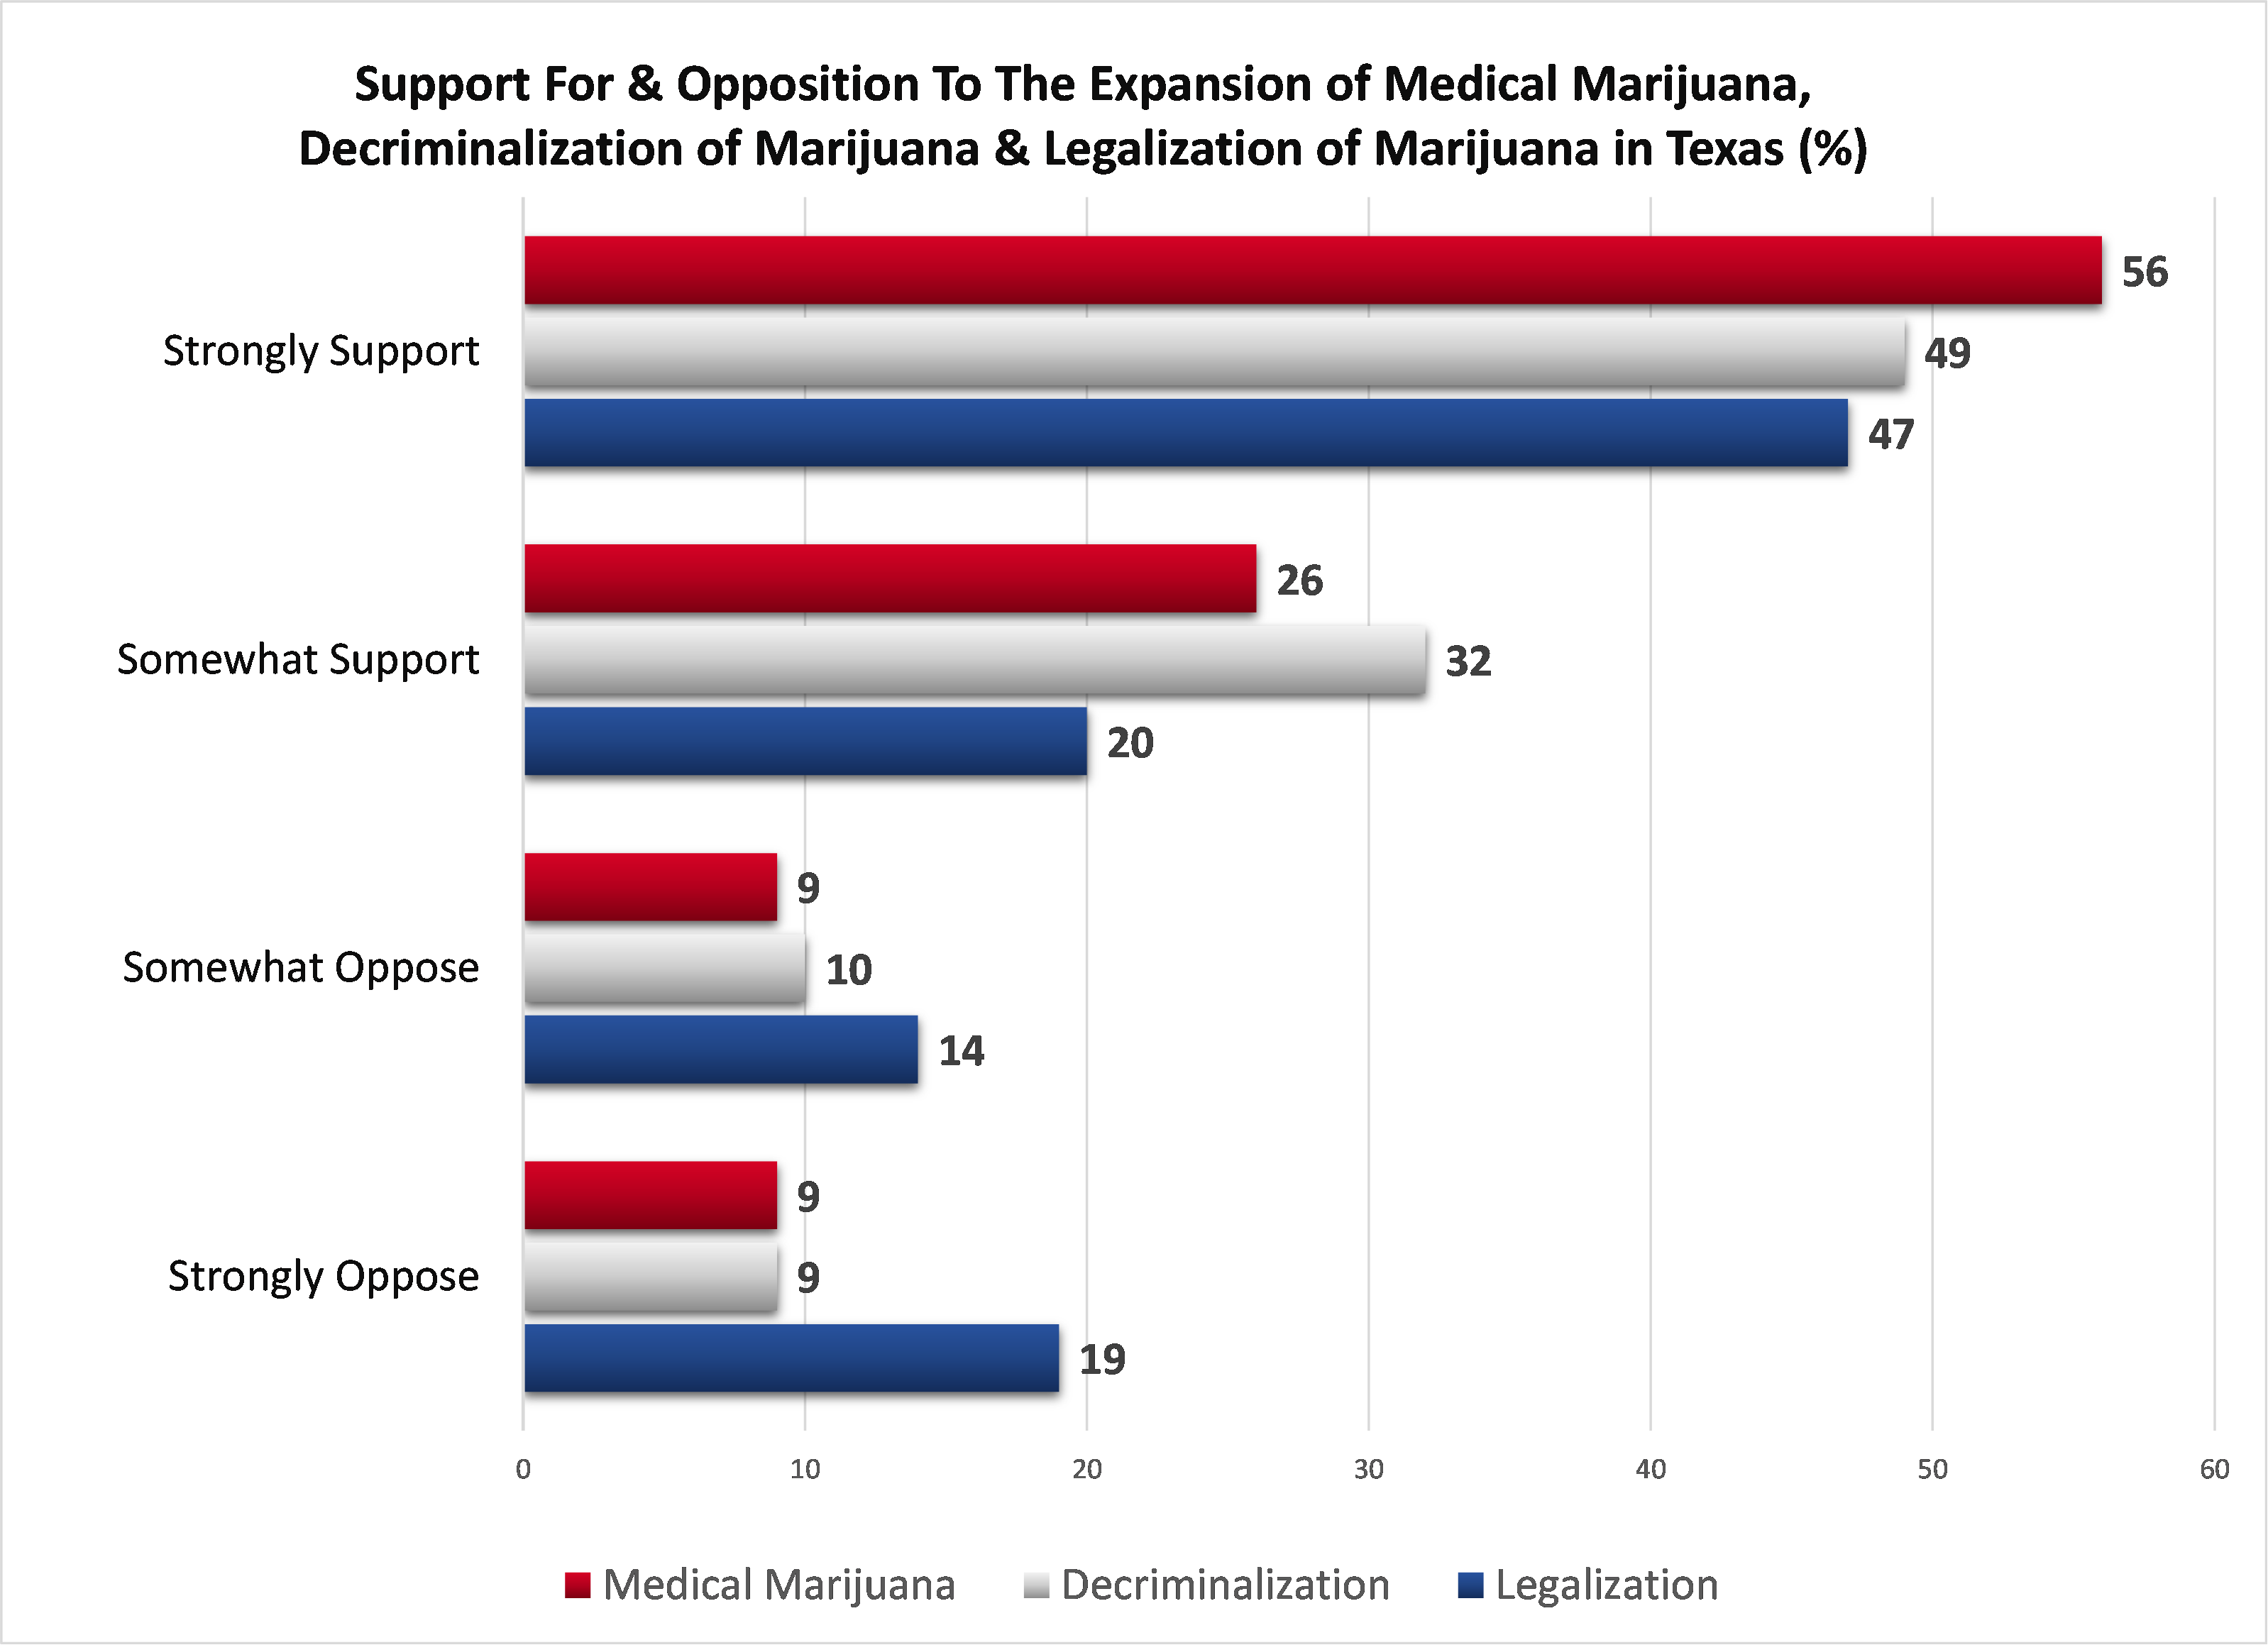 Graph image- Support for and opposition to the expansion of medical marijuana, decriminalization of marijuana and legalization of marijuana in Texas 